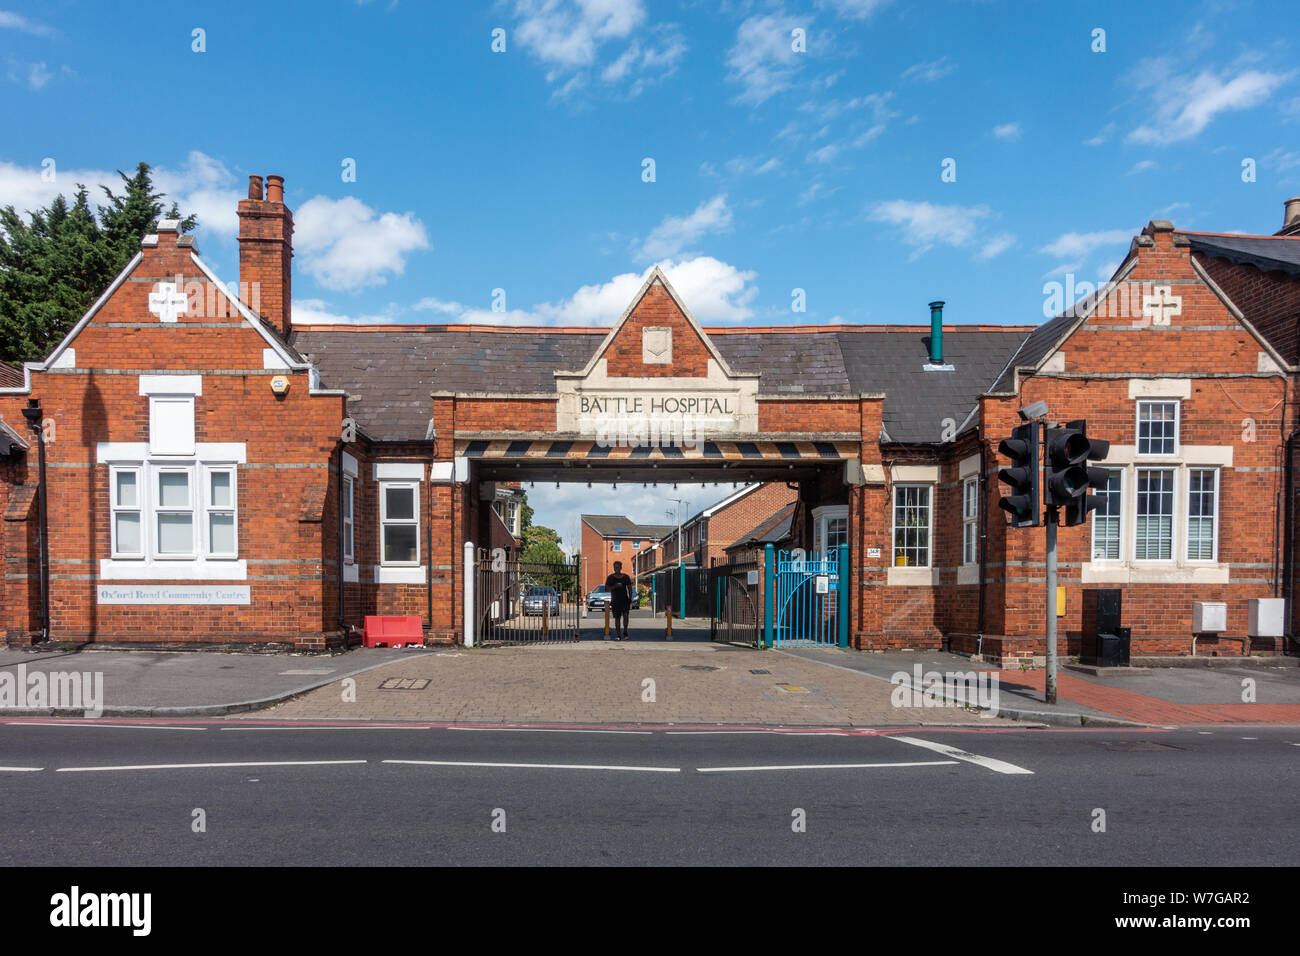 The old Battle Hospital in Reading, UK houses the Oxford Road Community Centre. Stock Photo